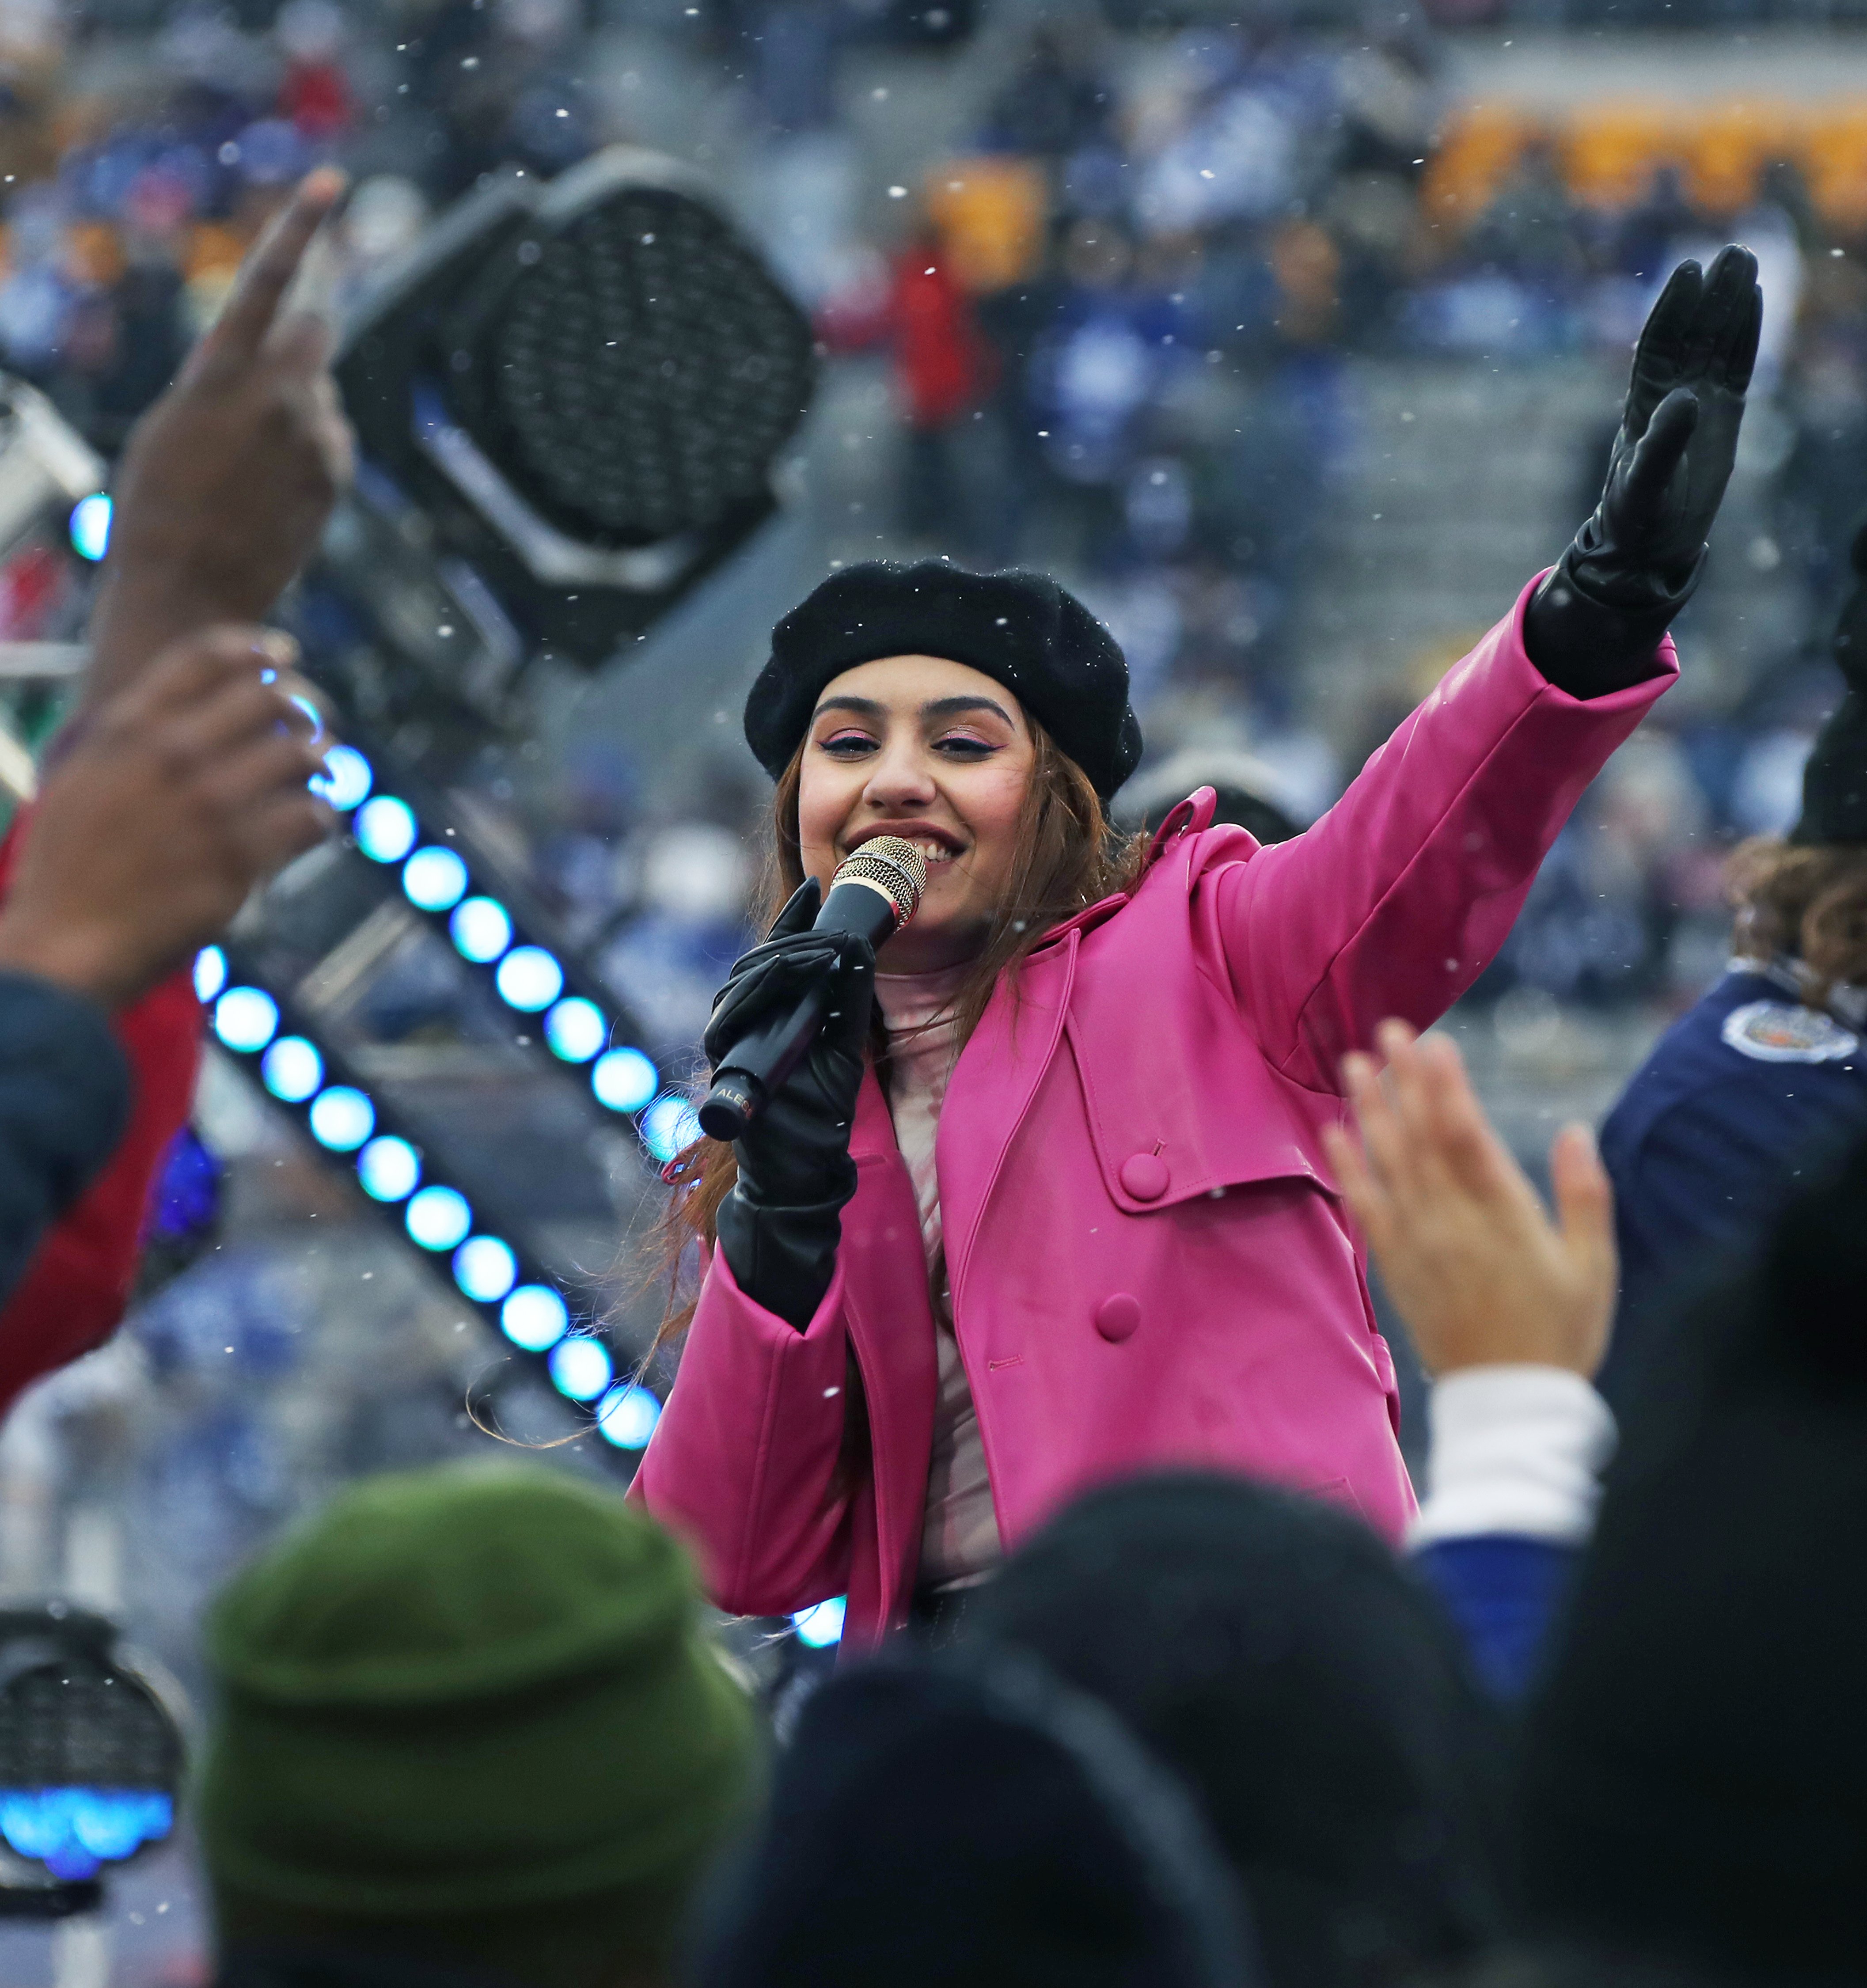 Alessia Cara during the 1st period intermission of the game between the Toronto Maple Leafs and the Buffalo Sabres in 2022, in Hamilton, Ontario, Canada. | Source: Getty Images